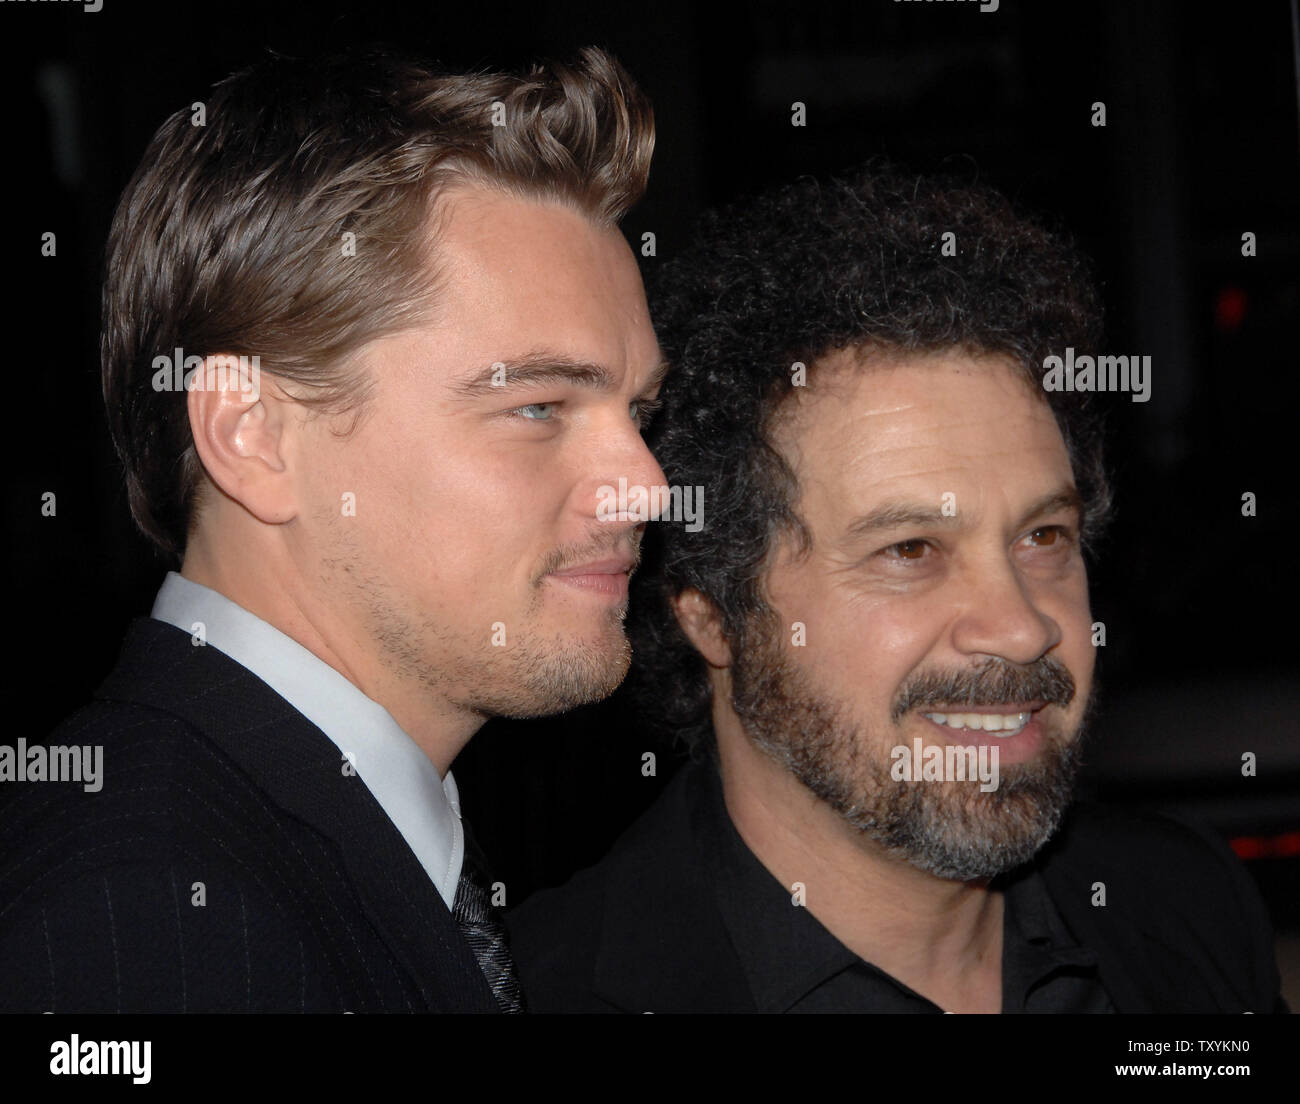 Actor Leonardo DiCaprio (L), star of the new motion picture drama 'Blood Diamond', and director Edward Zwick share a moment during the premiere of the film at Grauman's Chinese Theatre in the Hollywood section of Los Angeles on December 6, 2006. The film, set in Sierra Leone is about a quest to recover a rare diamond. (UPI Photo/Jim Ruymen) Stock Photo